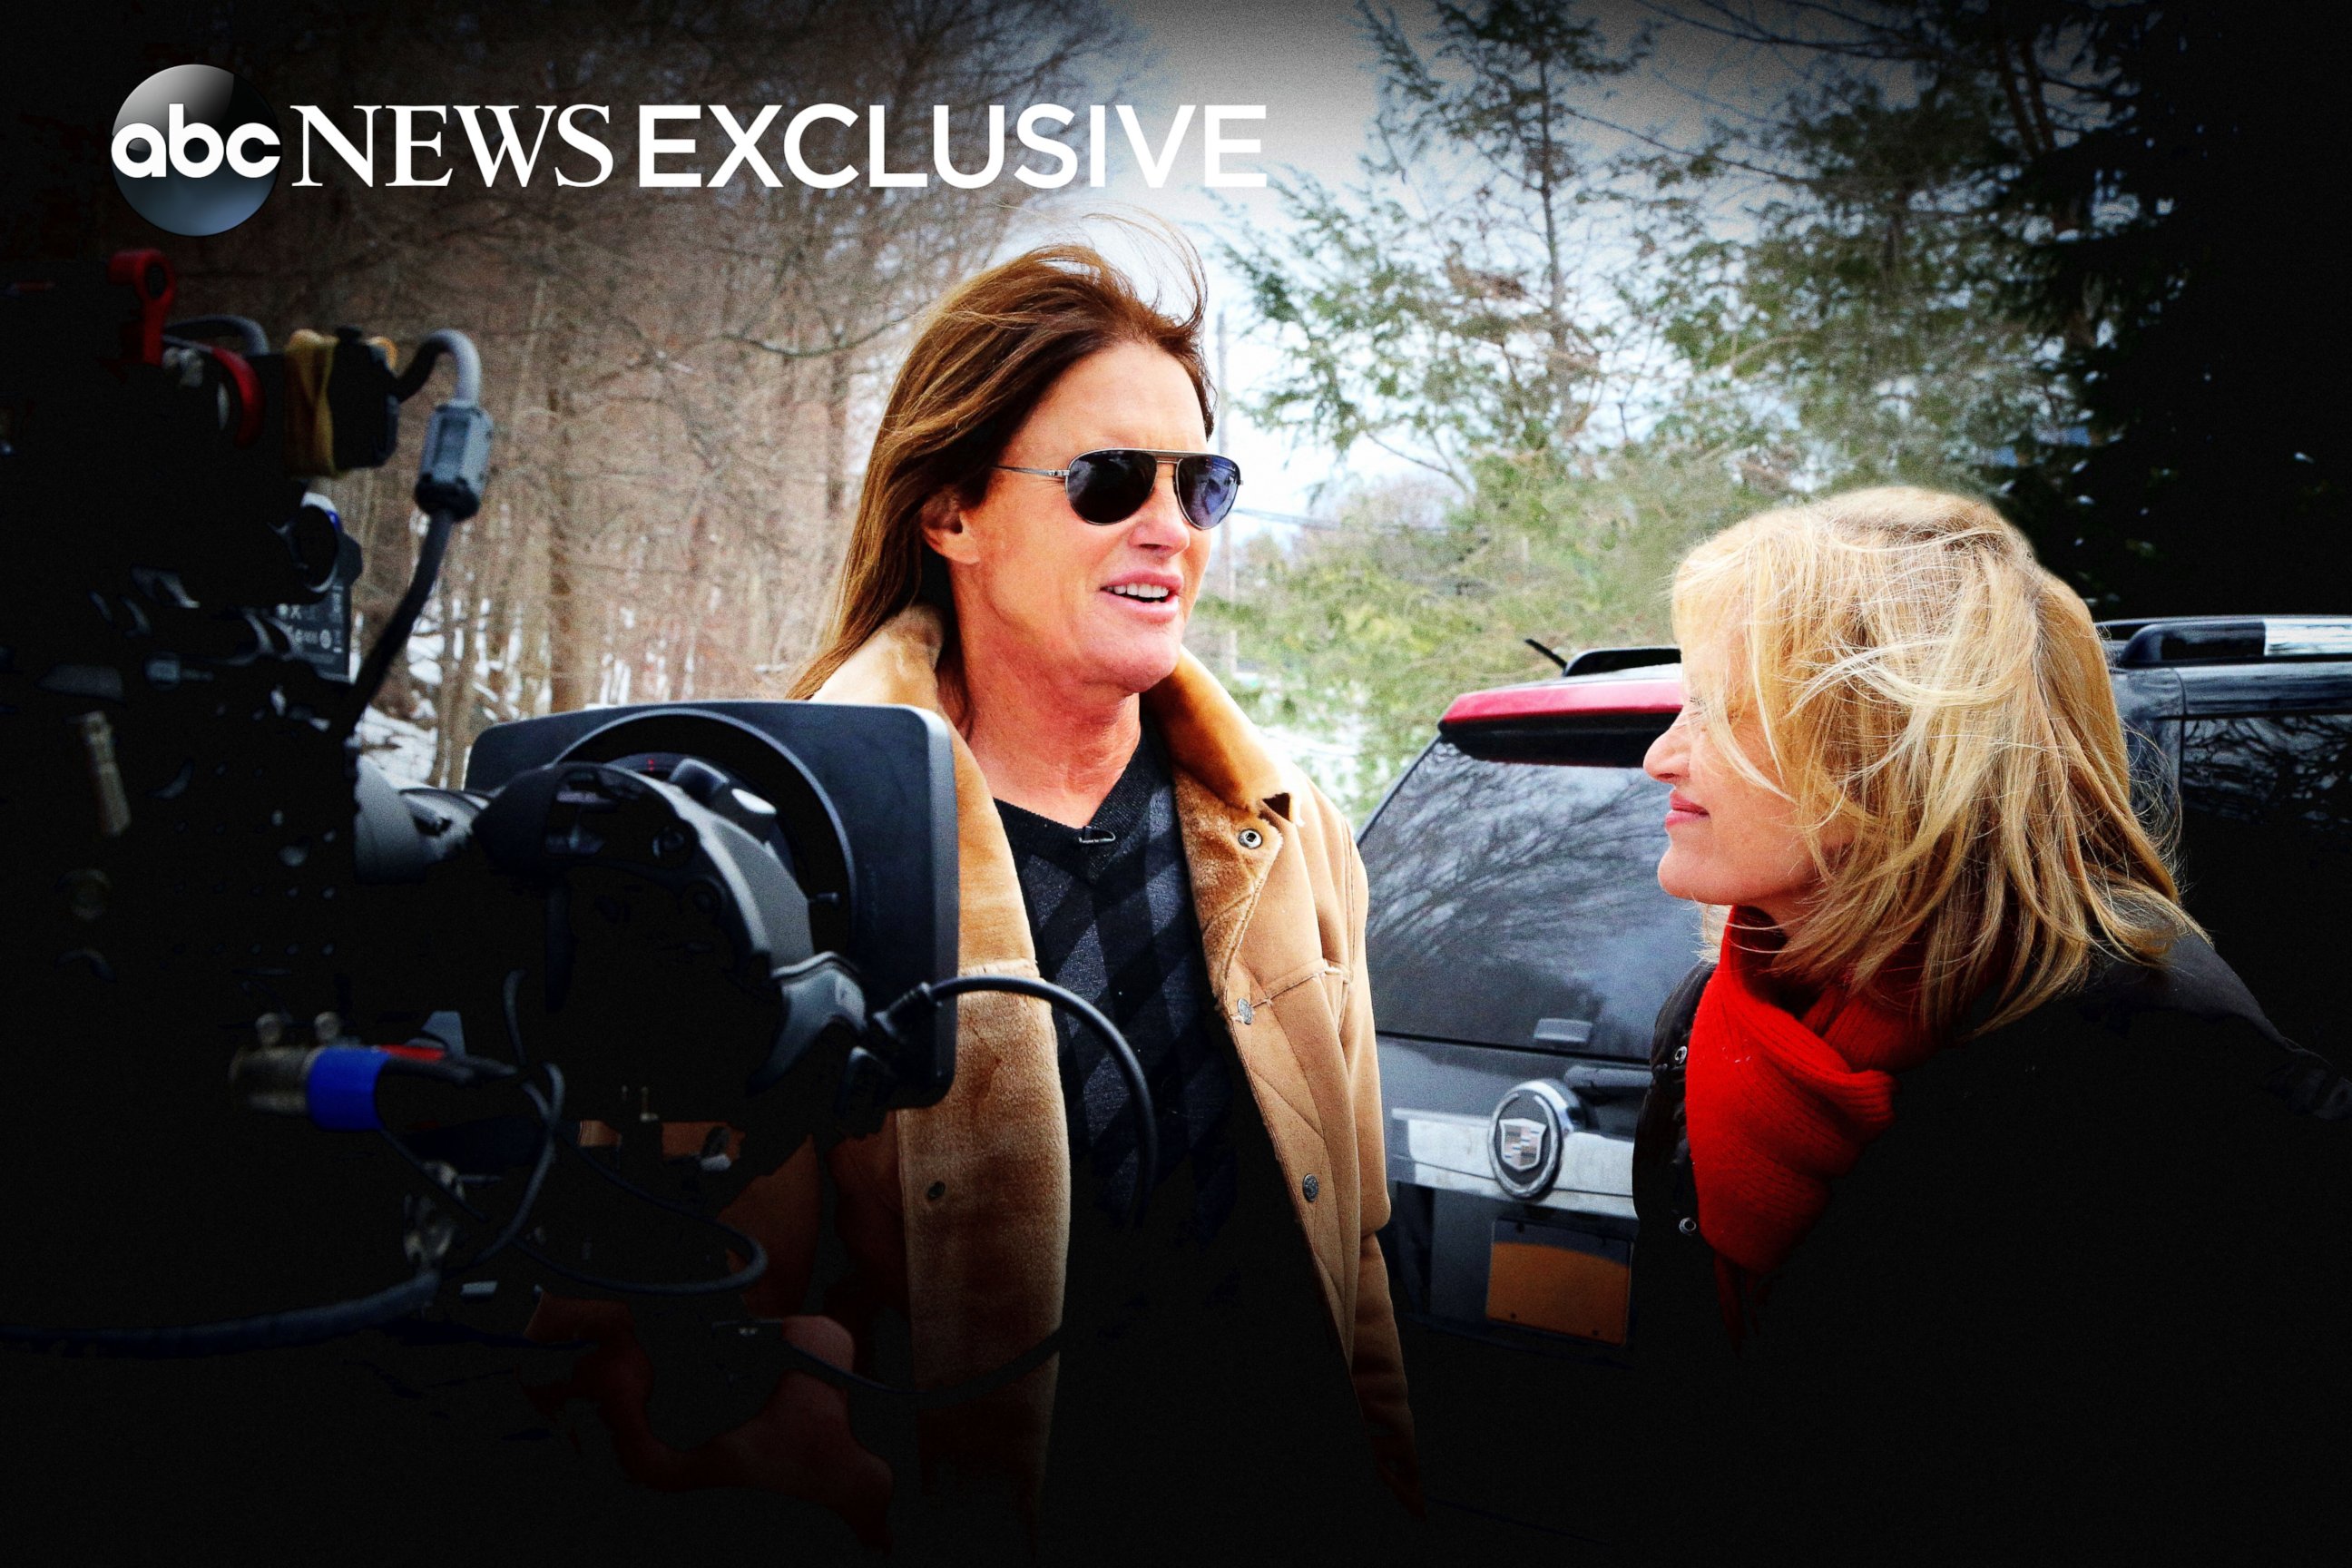 PHOTO: Bruce Jenner - The Interview is expected to air on April 24, 2015.